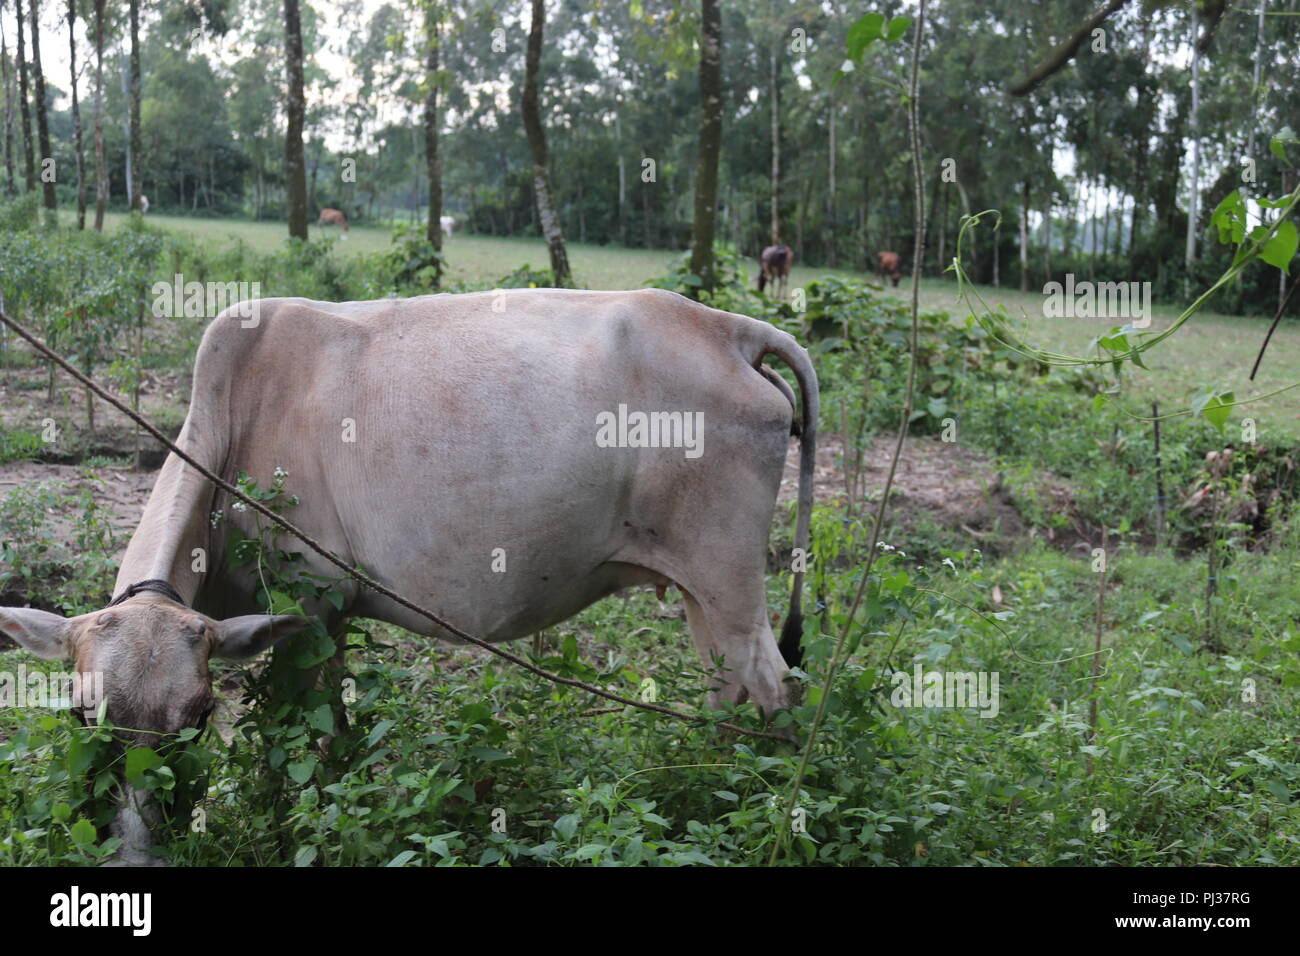 Brown and white cows in a grassy field on a bright and sunny day in The Bangladesh.Cows on a green field. Stock Photo